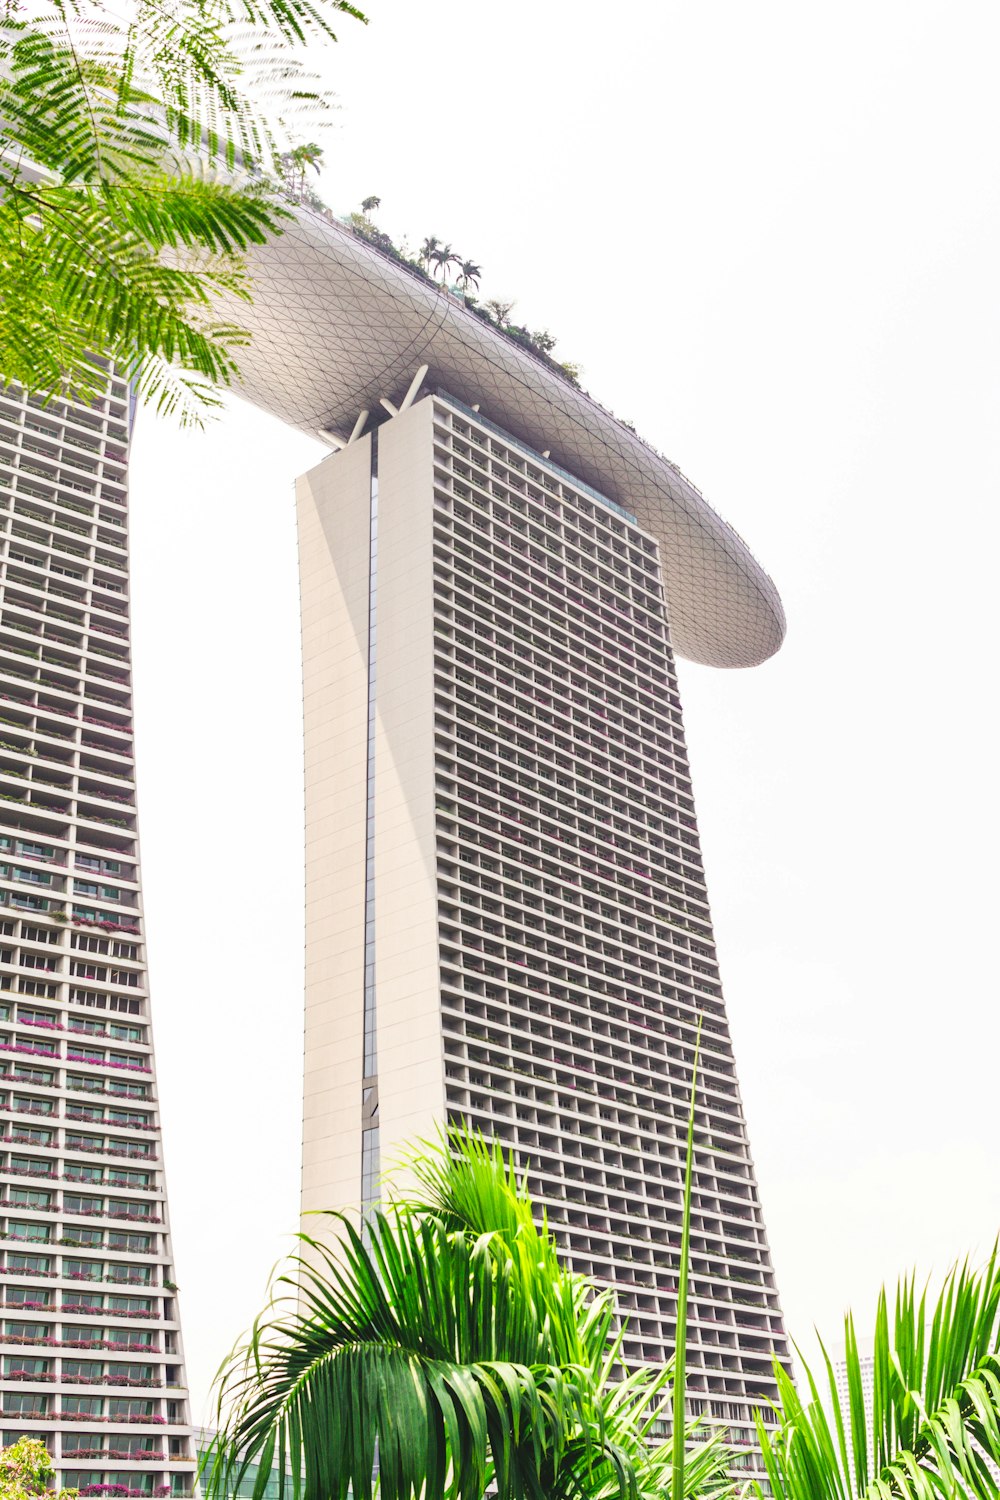 Marina Bay Sands, Singapore during day